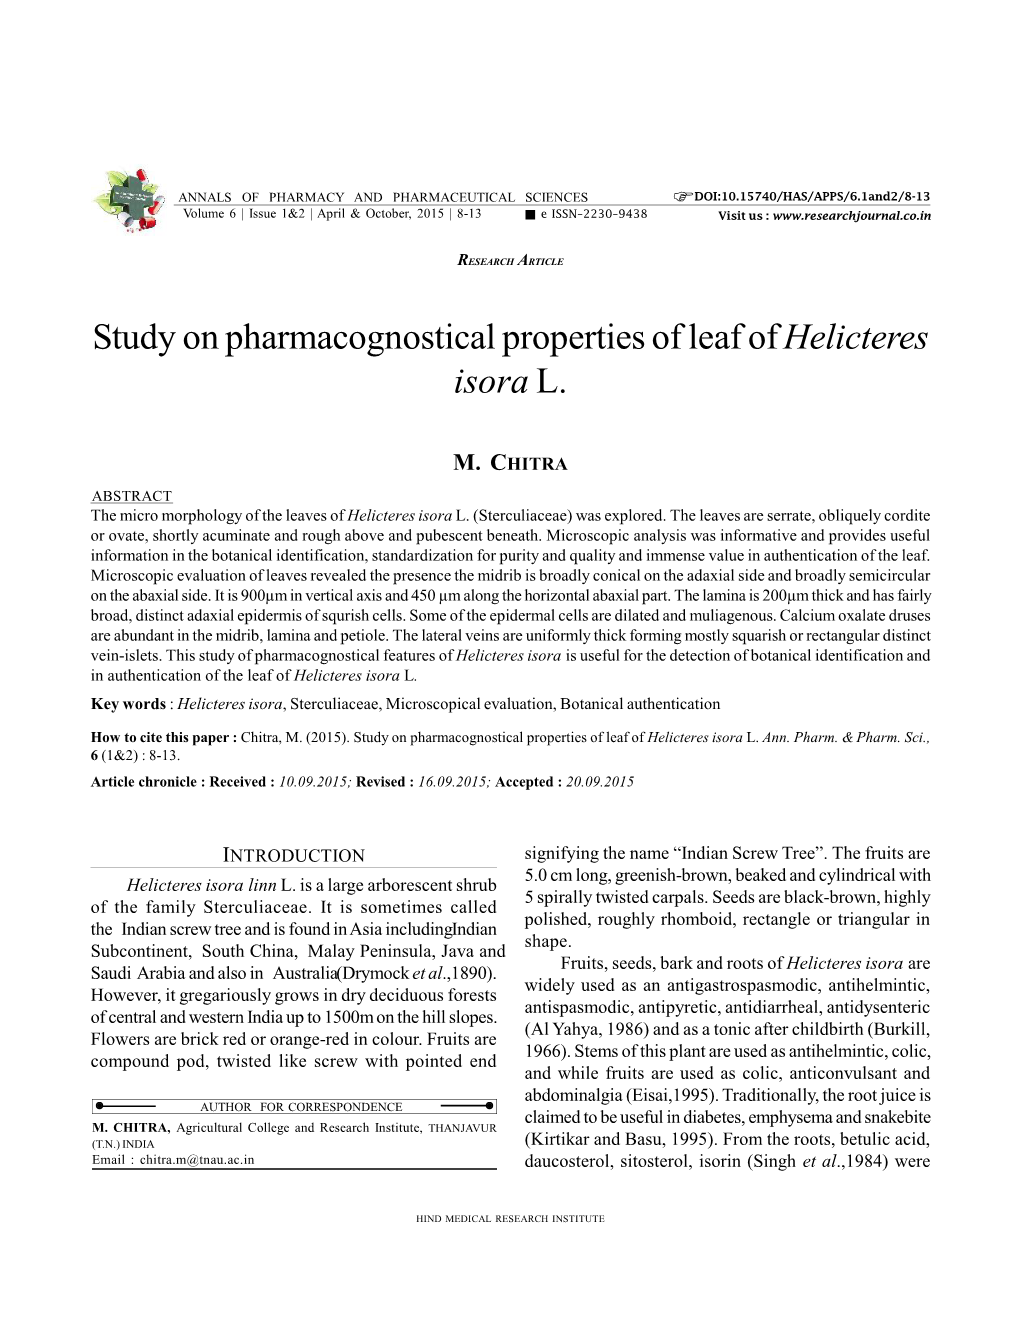 Study on Pharmacognostical Properties of Leaf Ofhelicteres Isora L